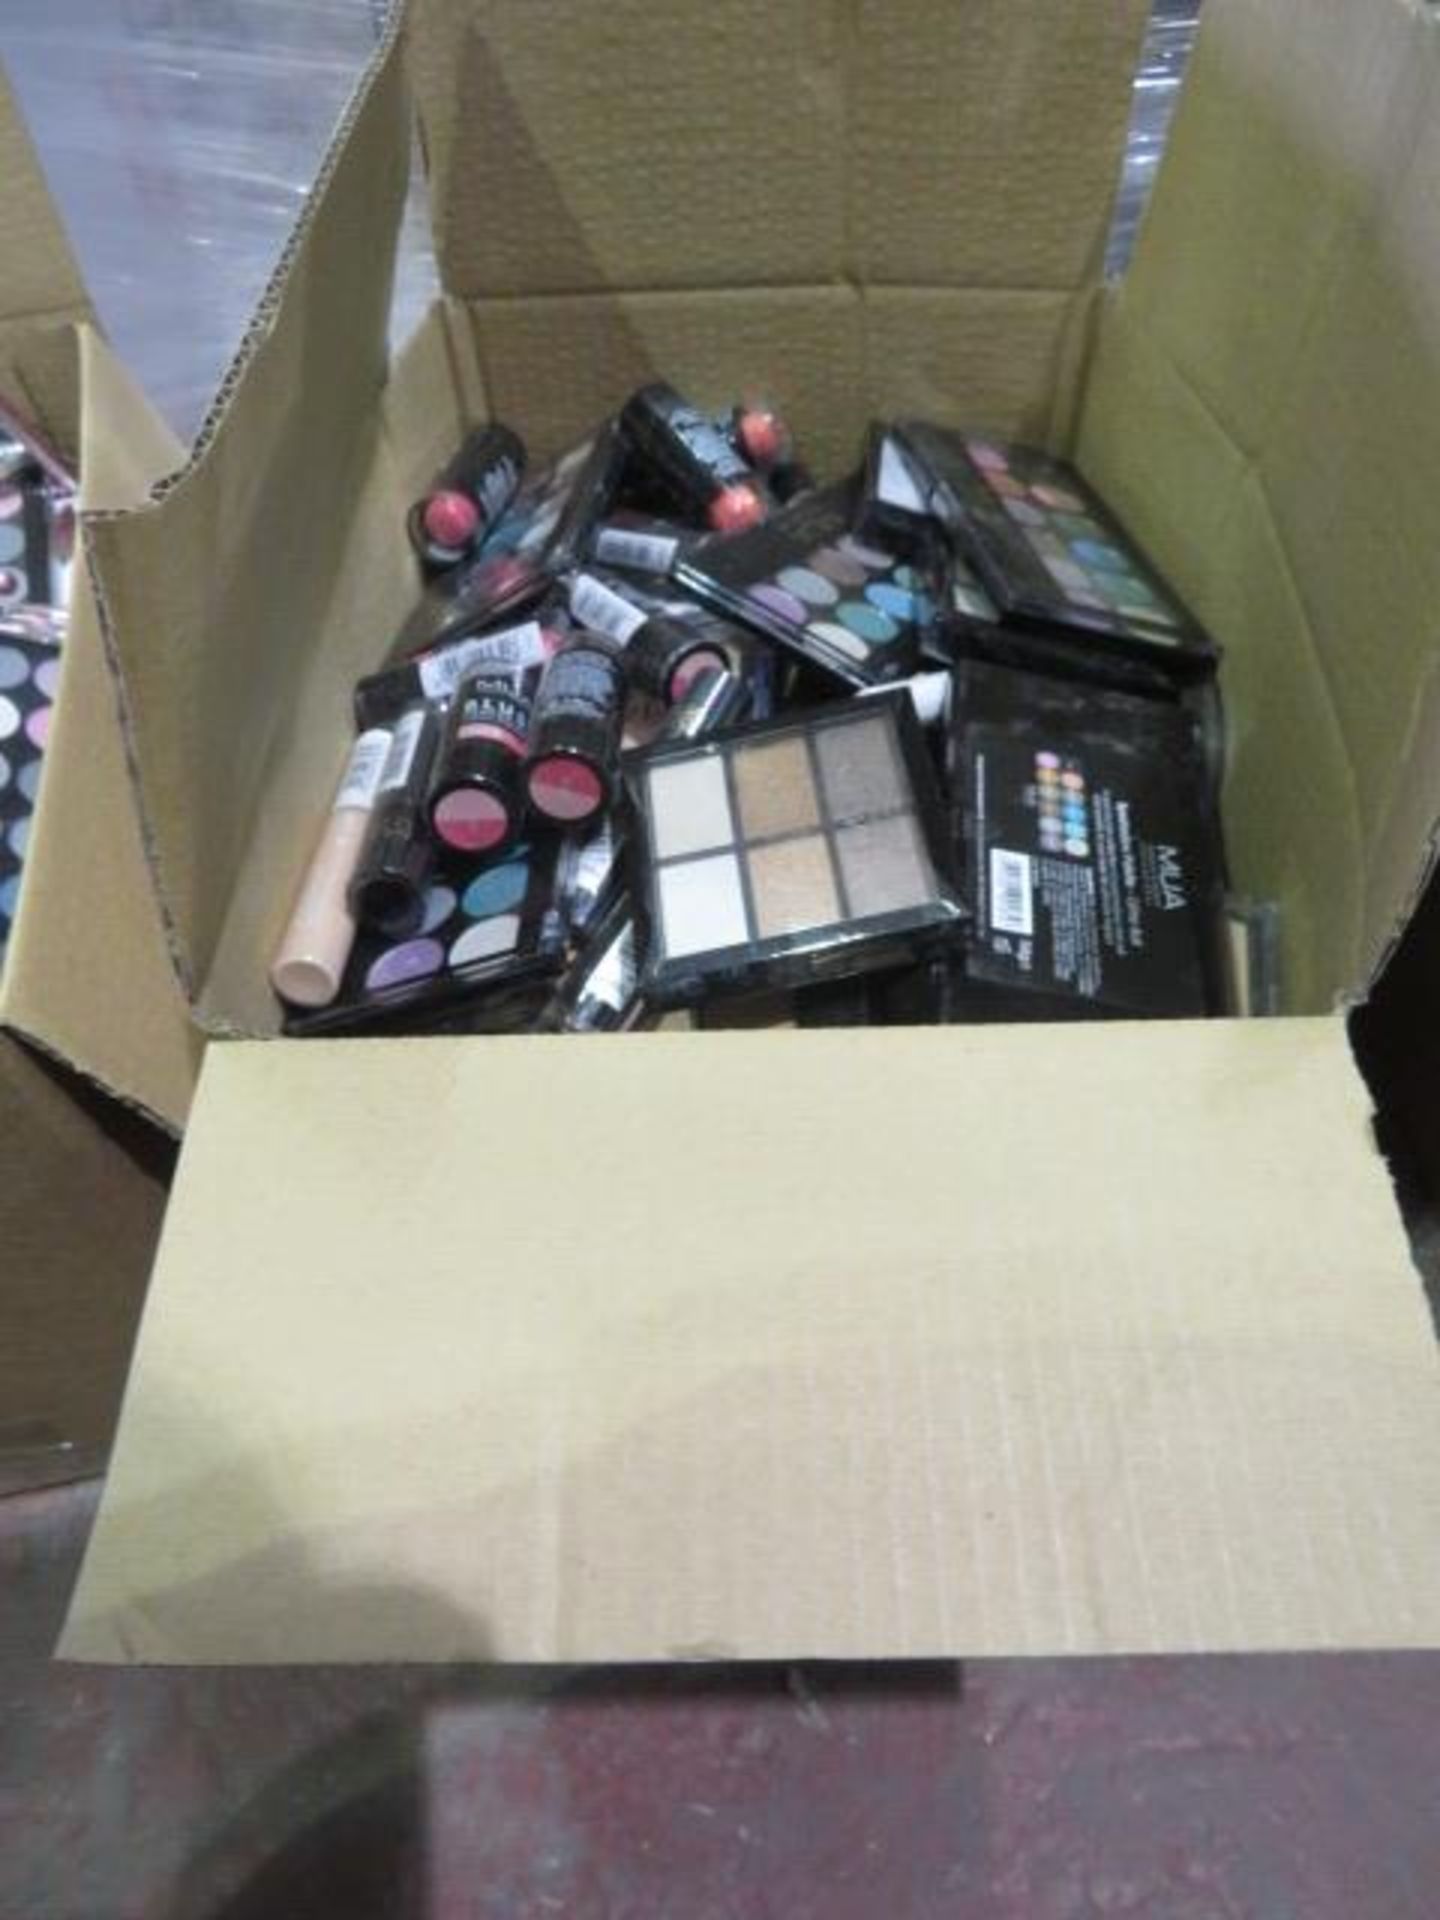 Circa. 200 items of various new make up acadamy make up to include: glitter ball eye shadow pal... - Image 2 of 2